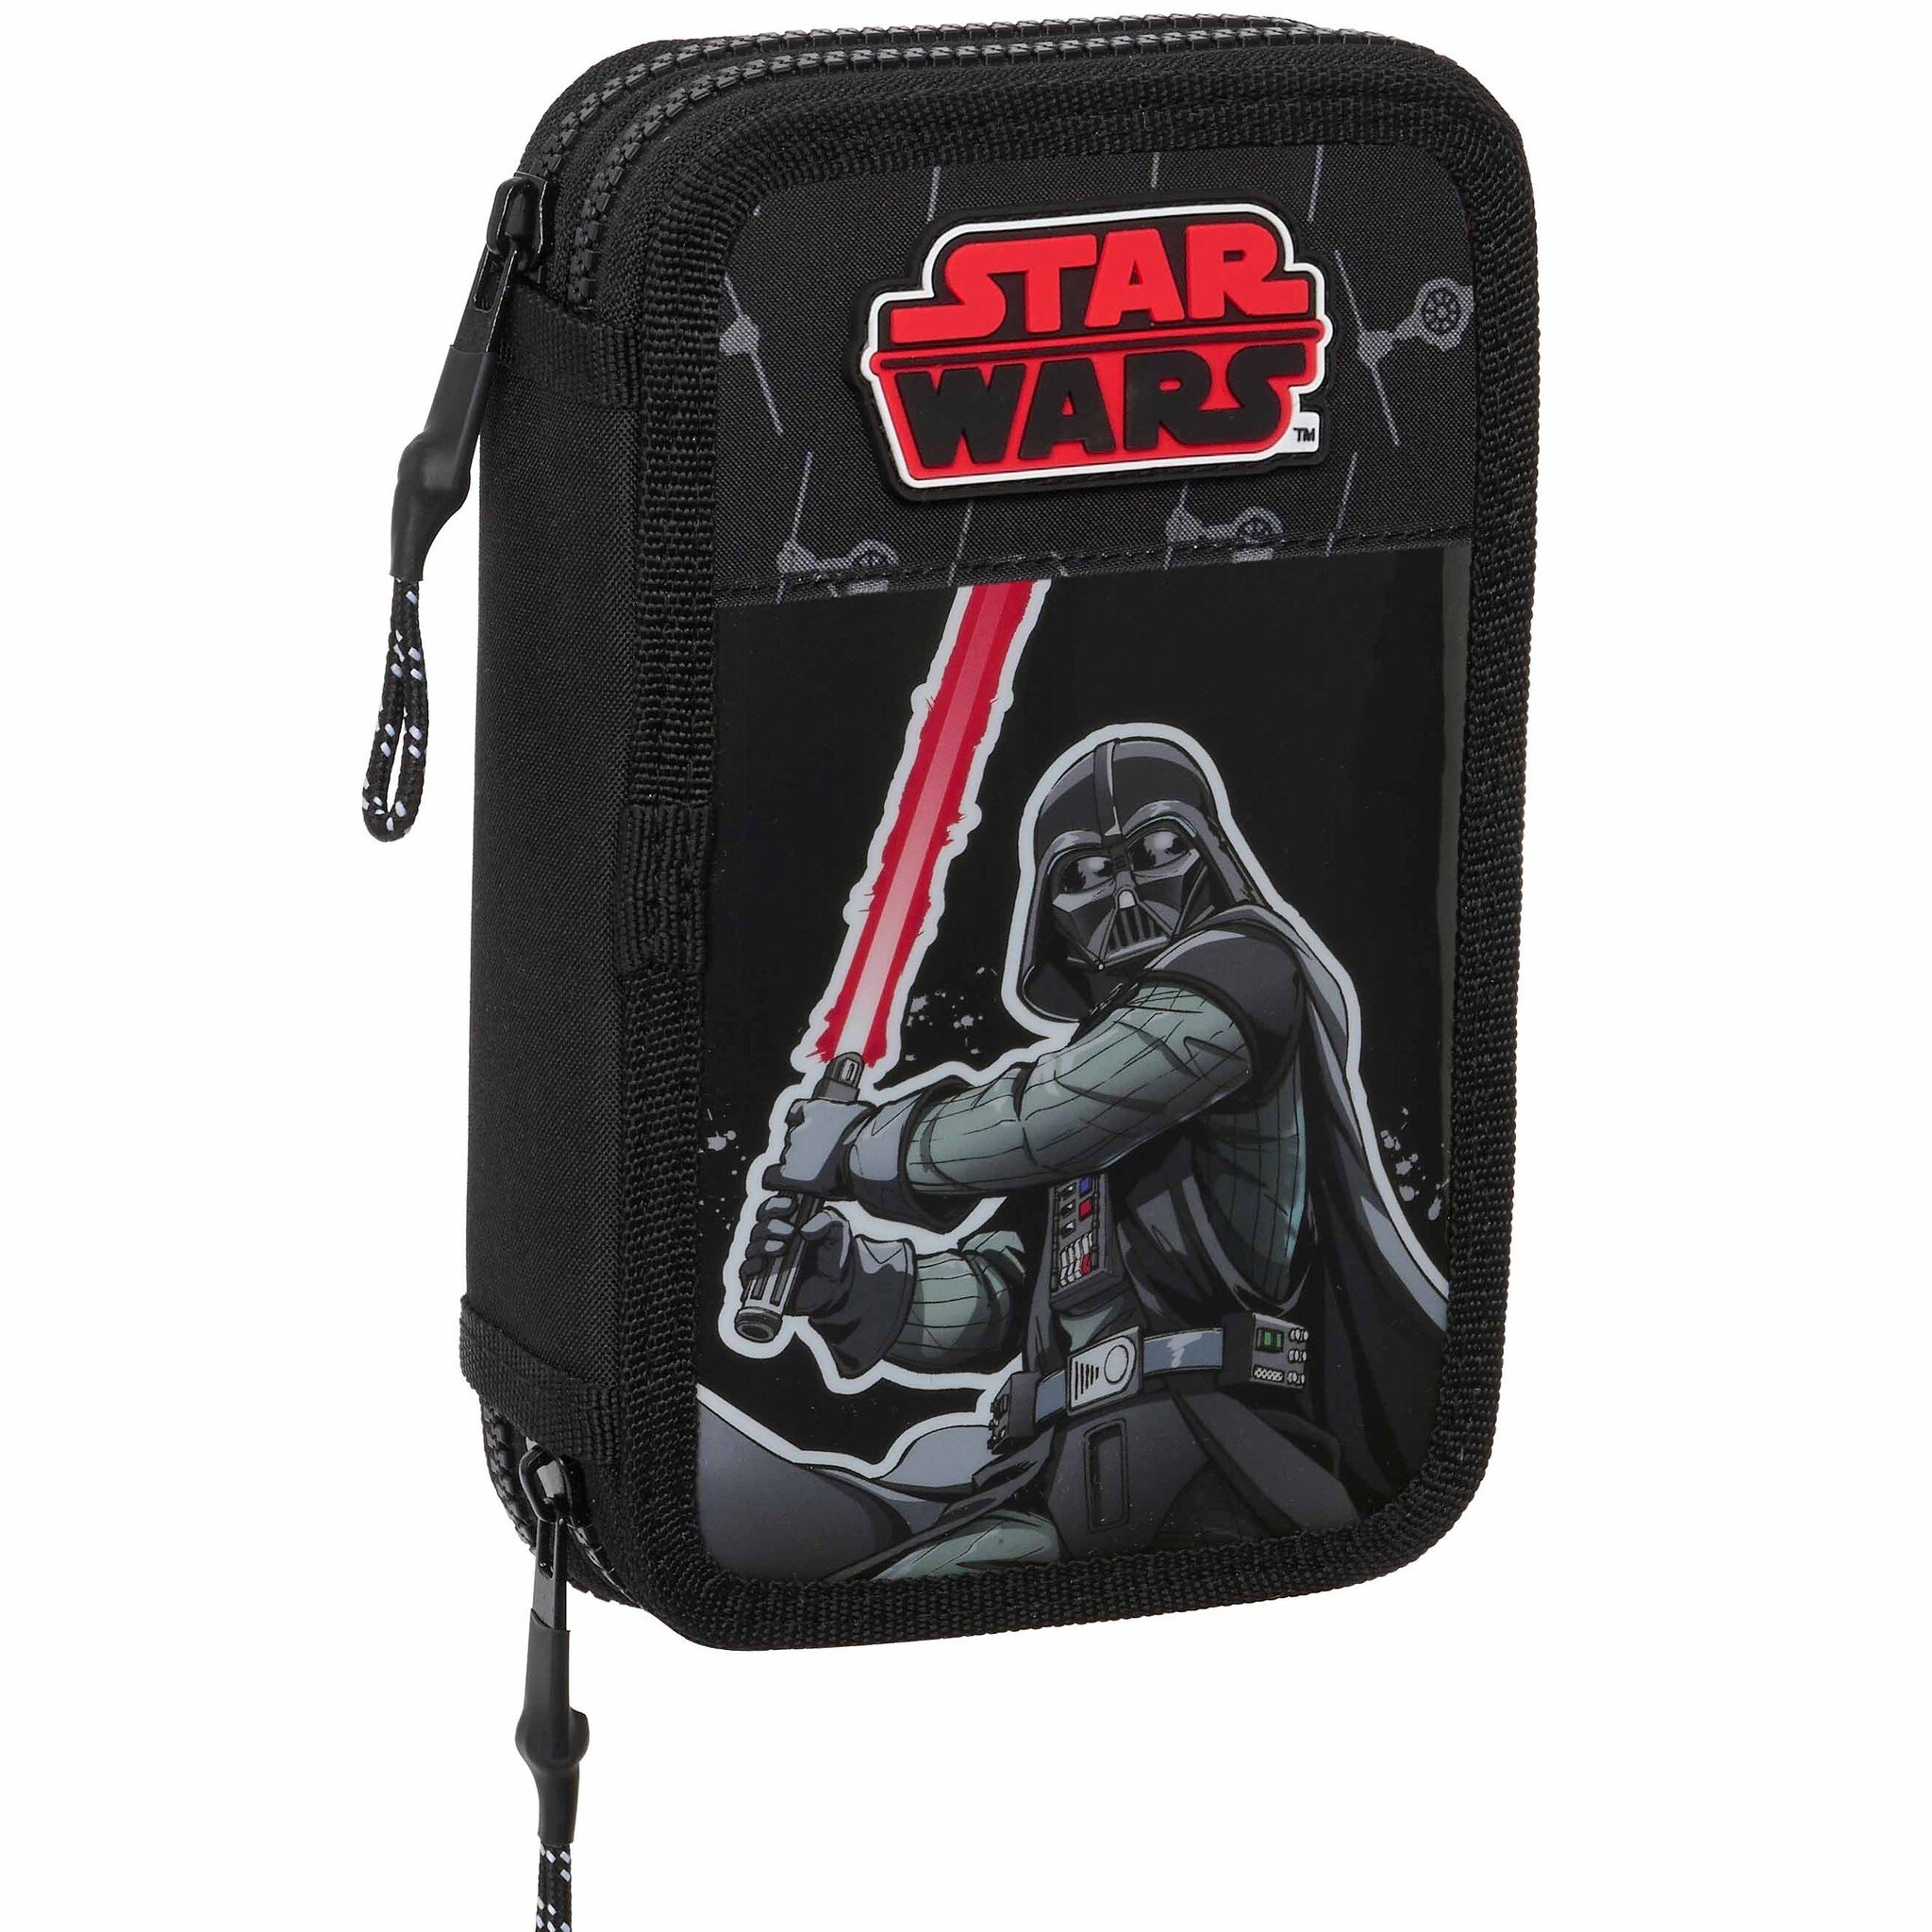 Star wars Filled Pouch, The Fighter - 28 pcs. - 19.5 x 12.5 x 4 cm - Polyester